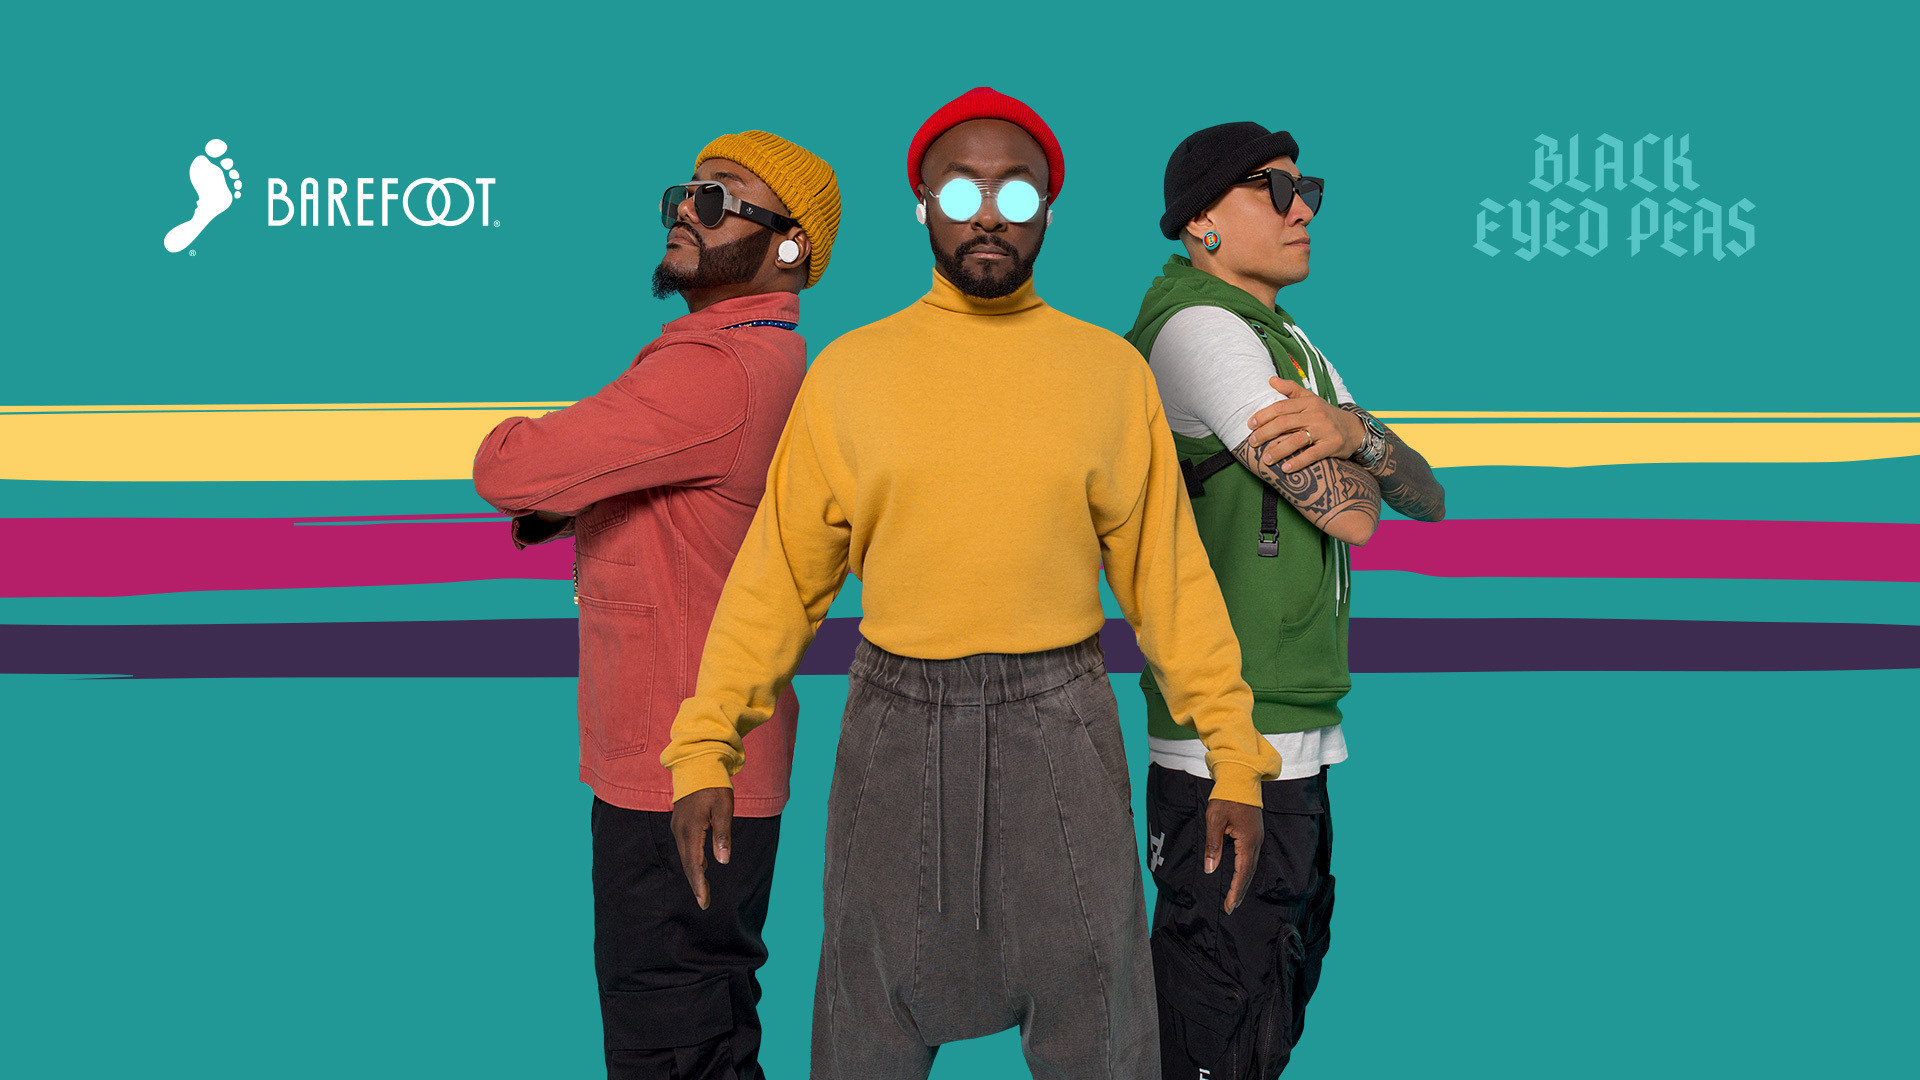 Barefoot and Black Eyed Peas ‘Band Together’ to launch augmented reality music experience